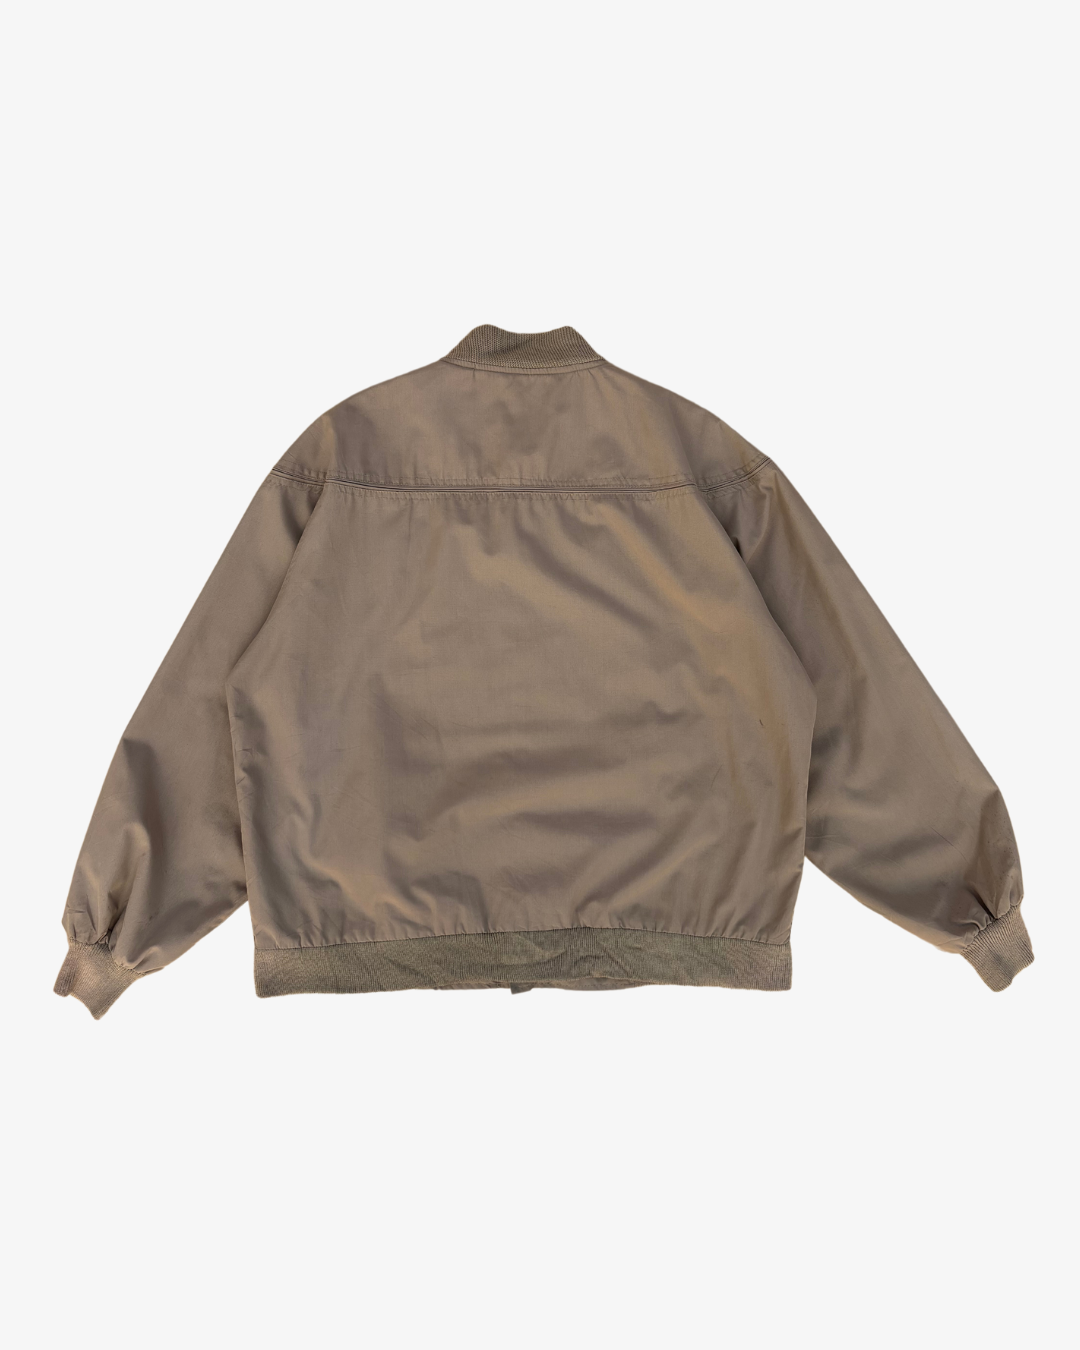 BOMBER JACKET BY DERBY